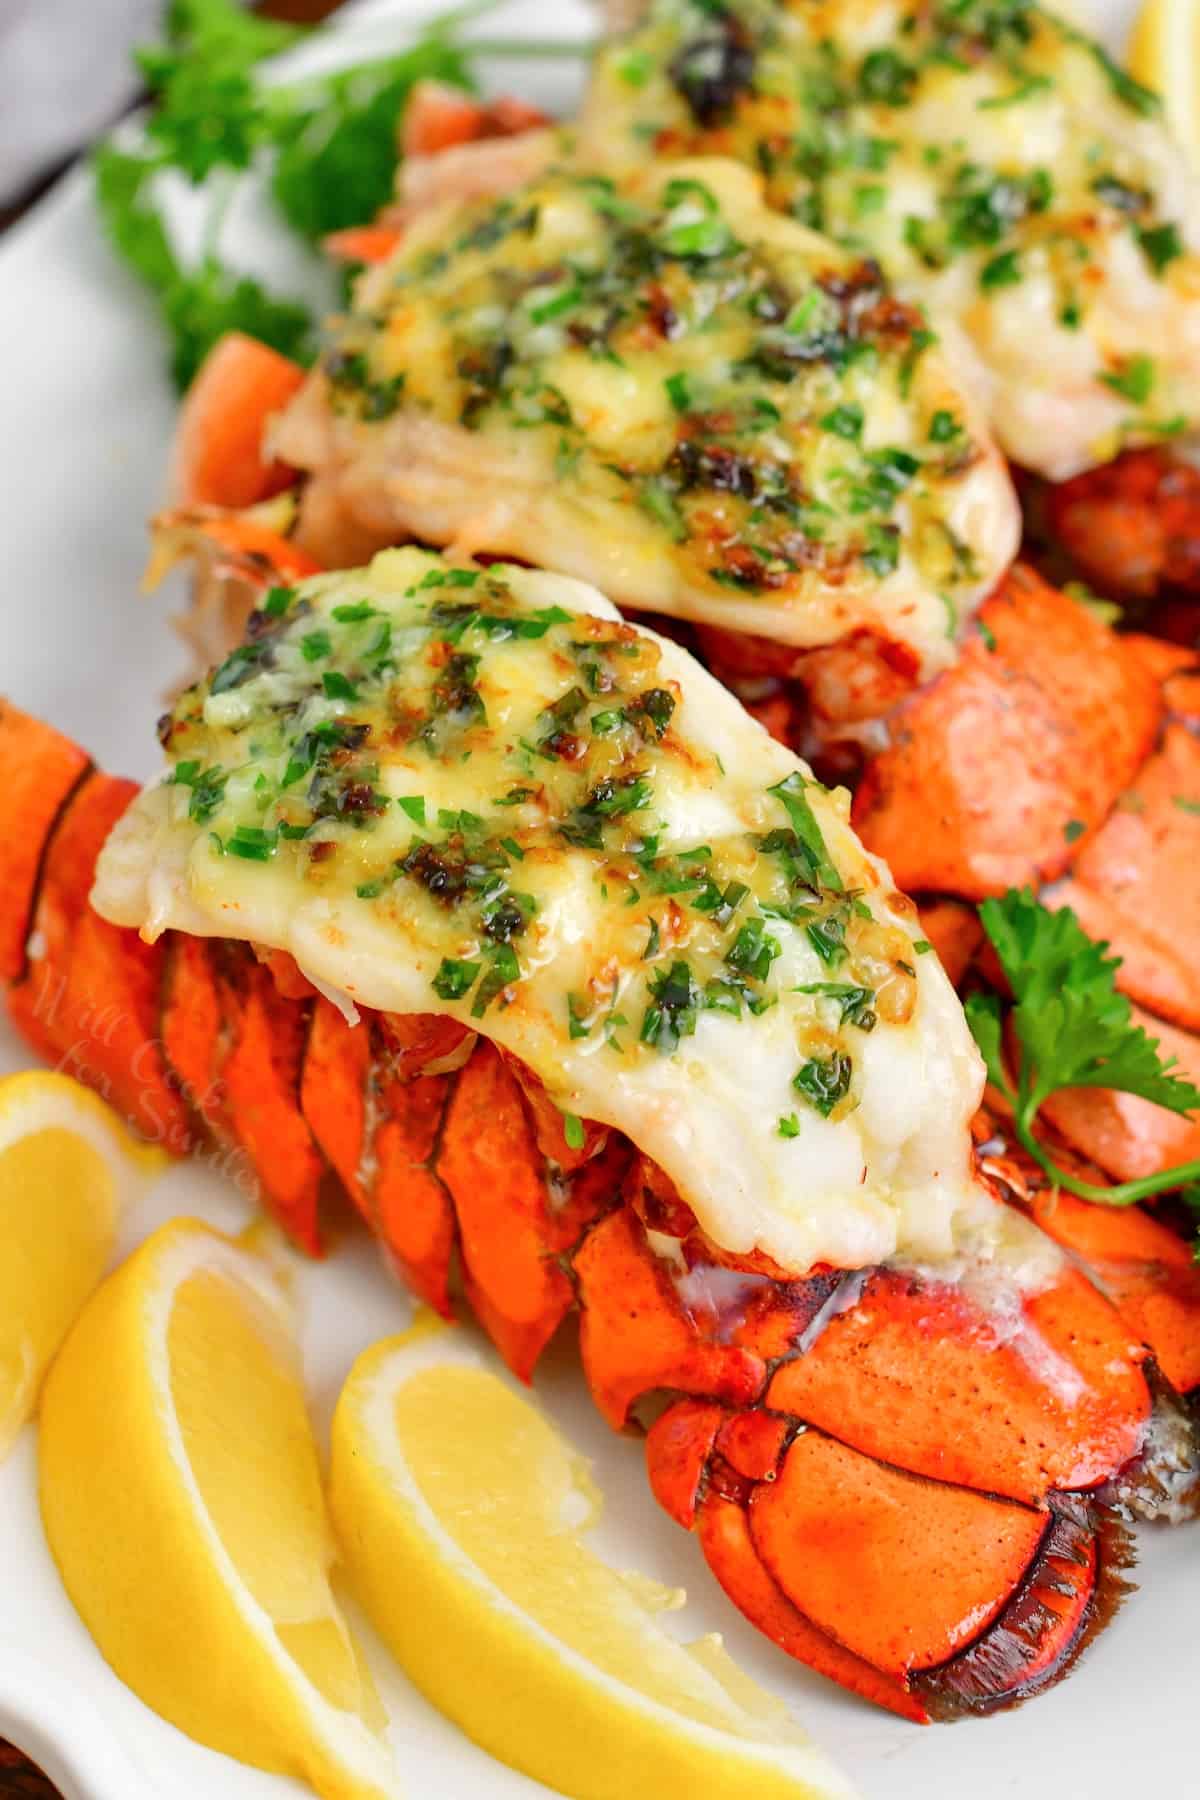 How to Prepare Lobster Tails